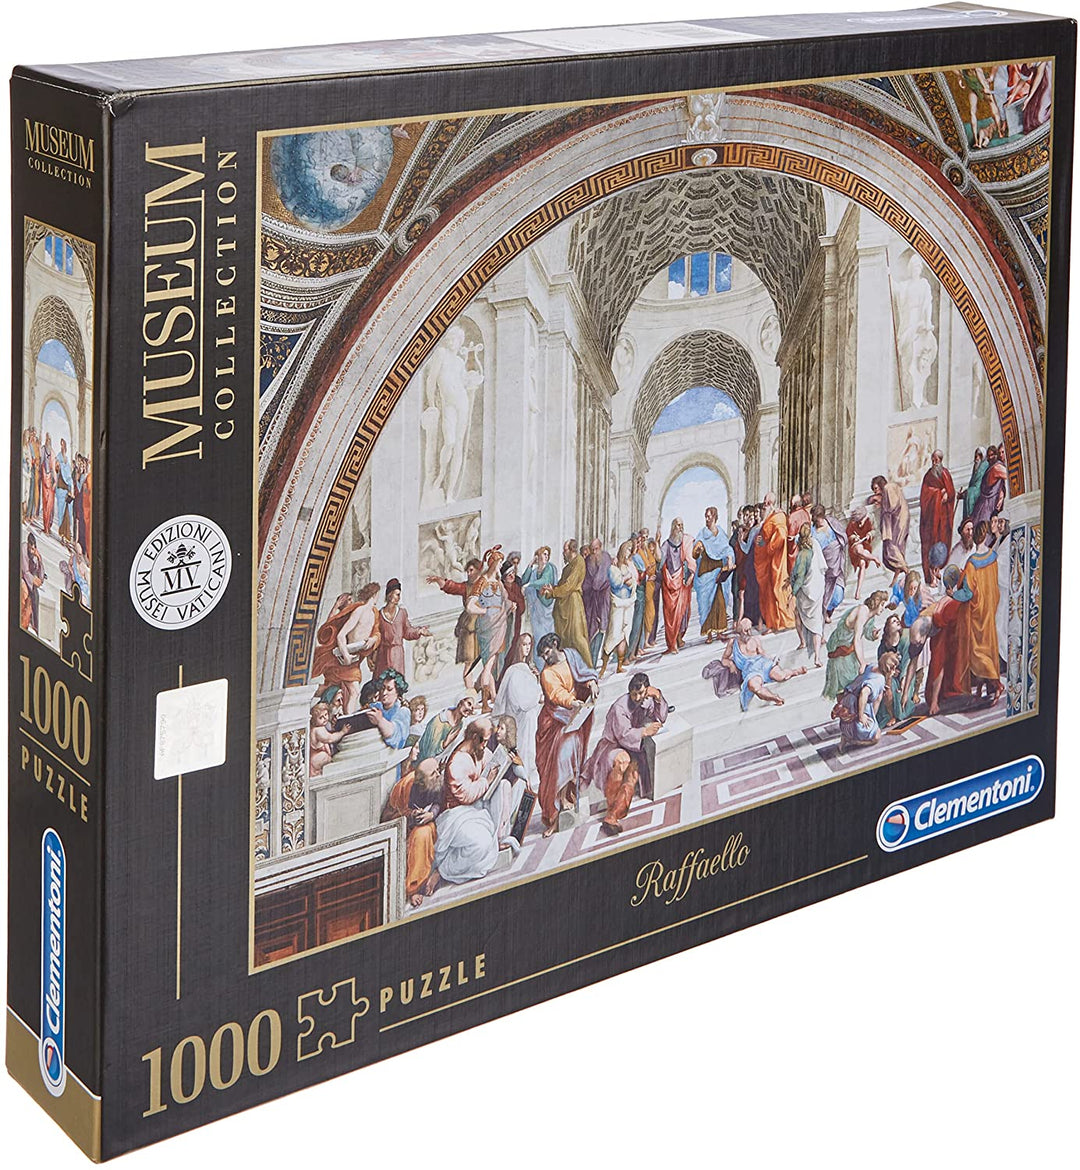 Clementoni 39483 39483-Vatican Jigsaw Puzzle The School of Athens 1000 Pieces, M